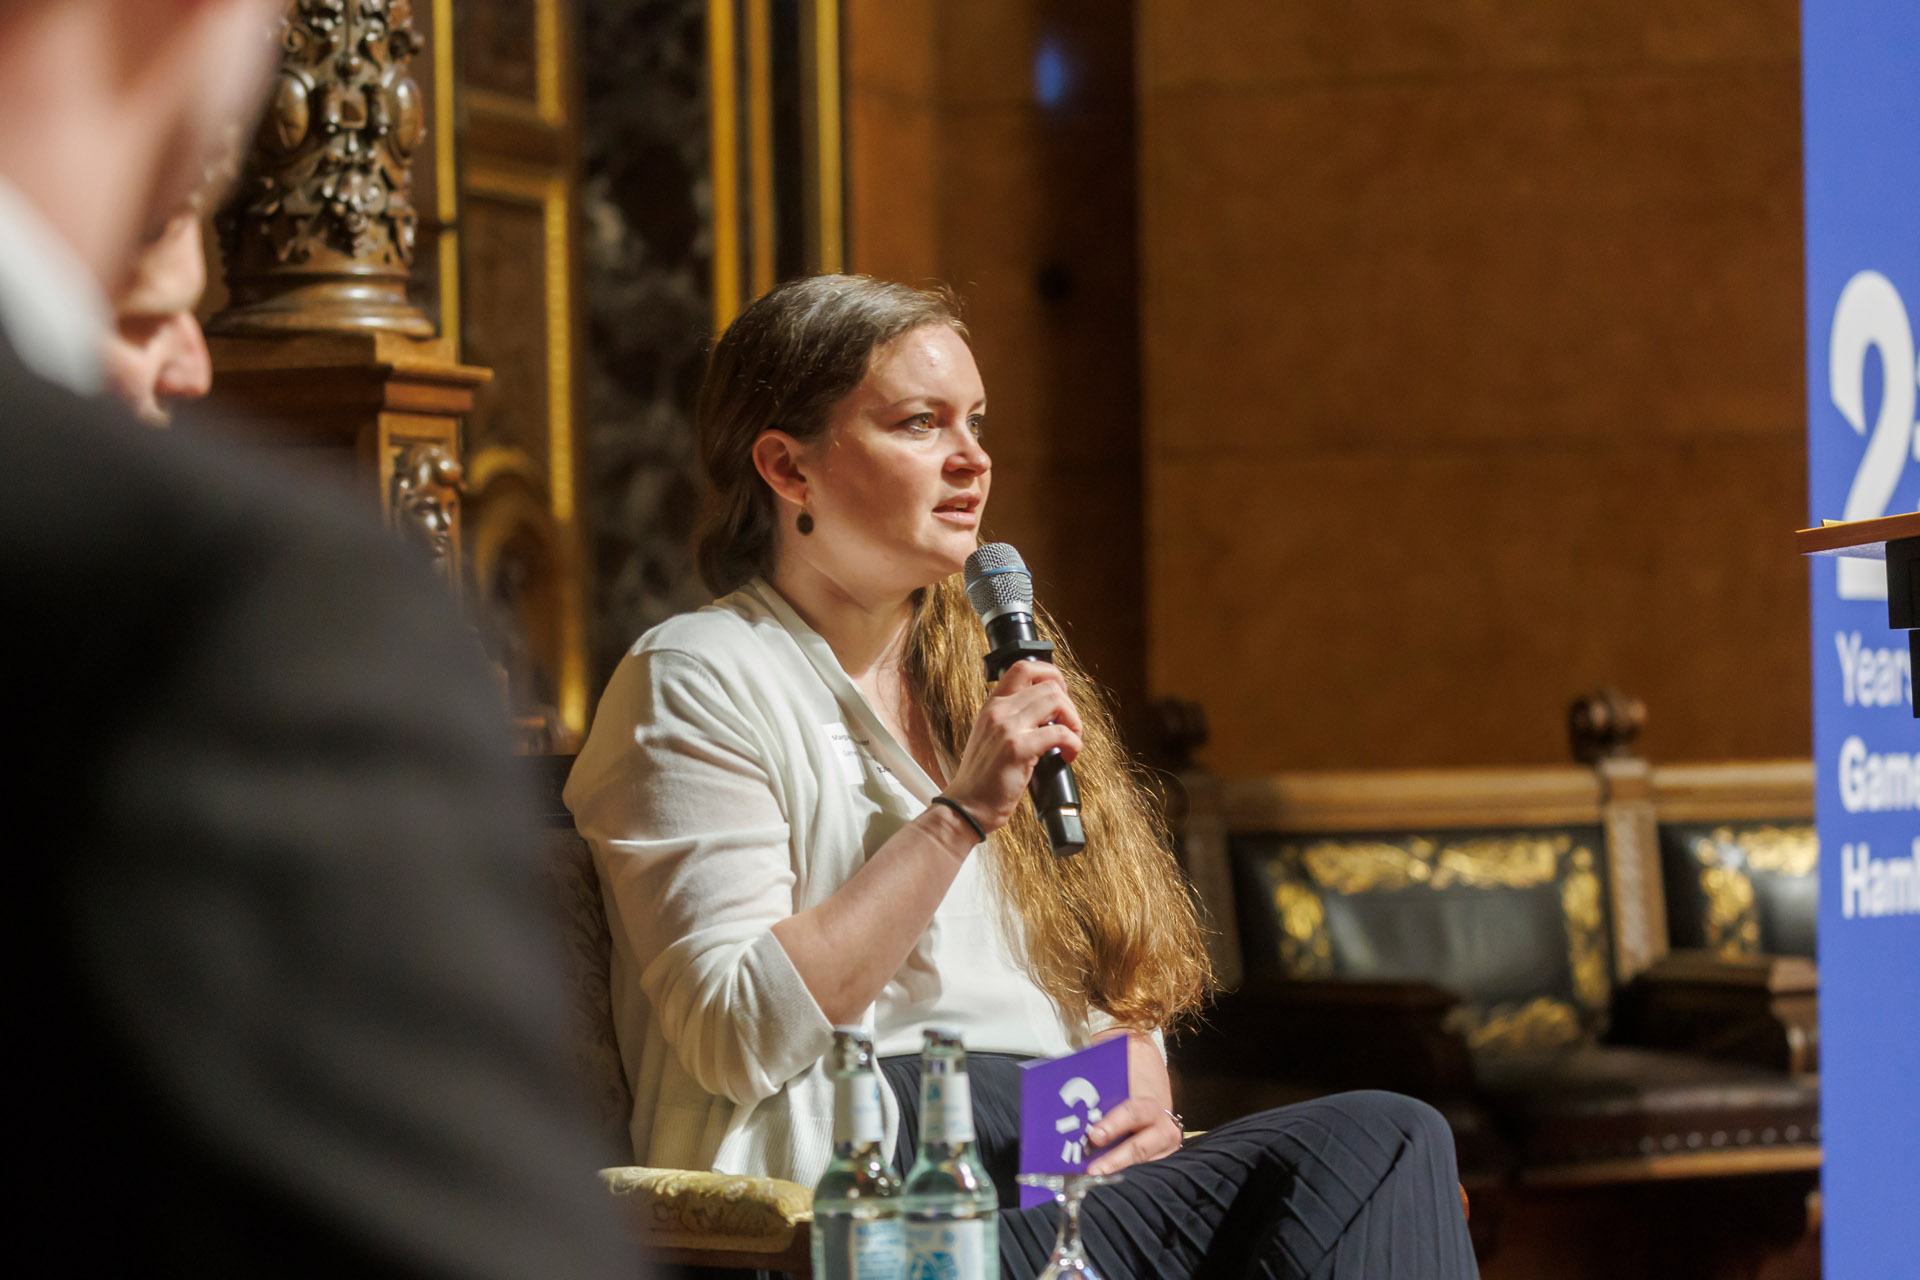 Project Manager for Gamecity Hamburg, Margarete Schneider leading the panel discussion / Photo by Marcelo Hernandez